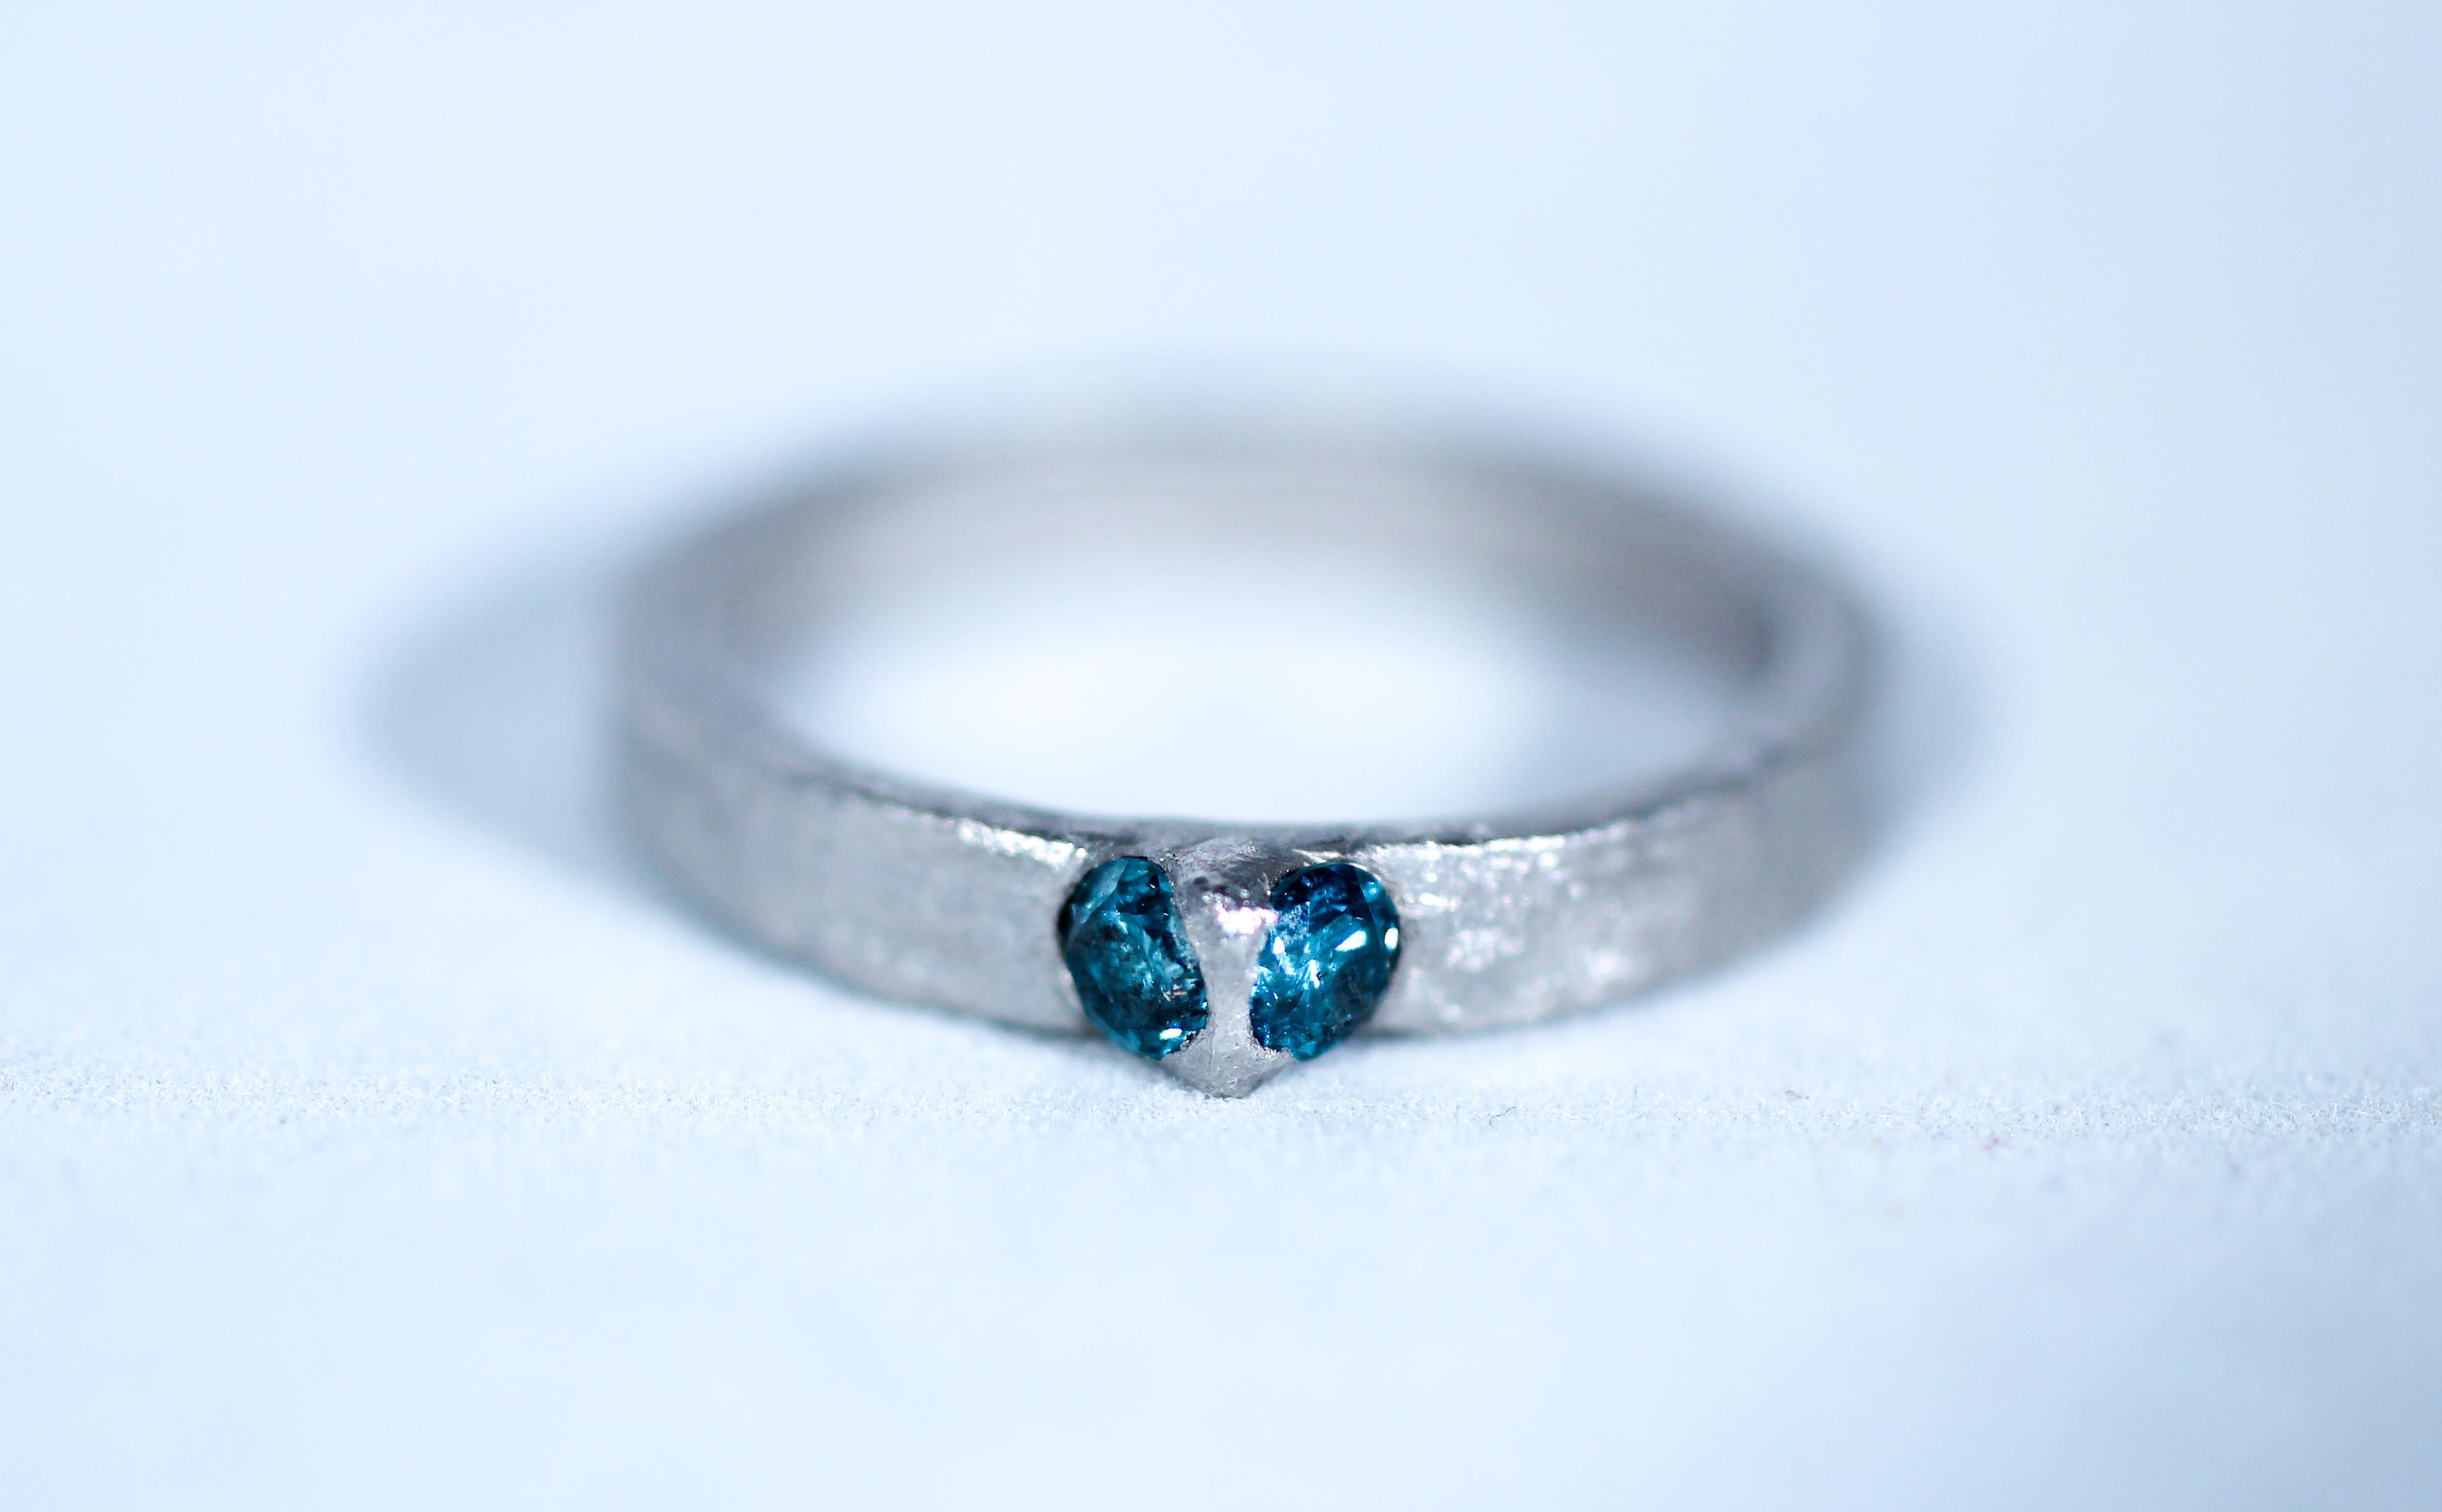 Blue diamonds in platinum, alternative engagement bridal band ring. A contemporary Simplicity Wide design in platinum with two flush-set blue diamonds. The streamlined shape and weightiness of platinum give this ring a certain stylish appeal. Wear